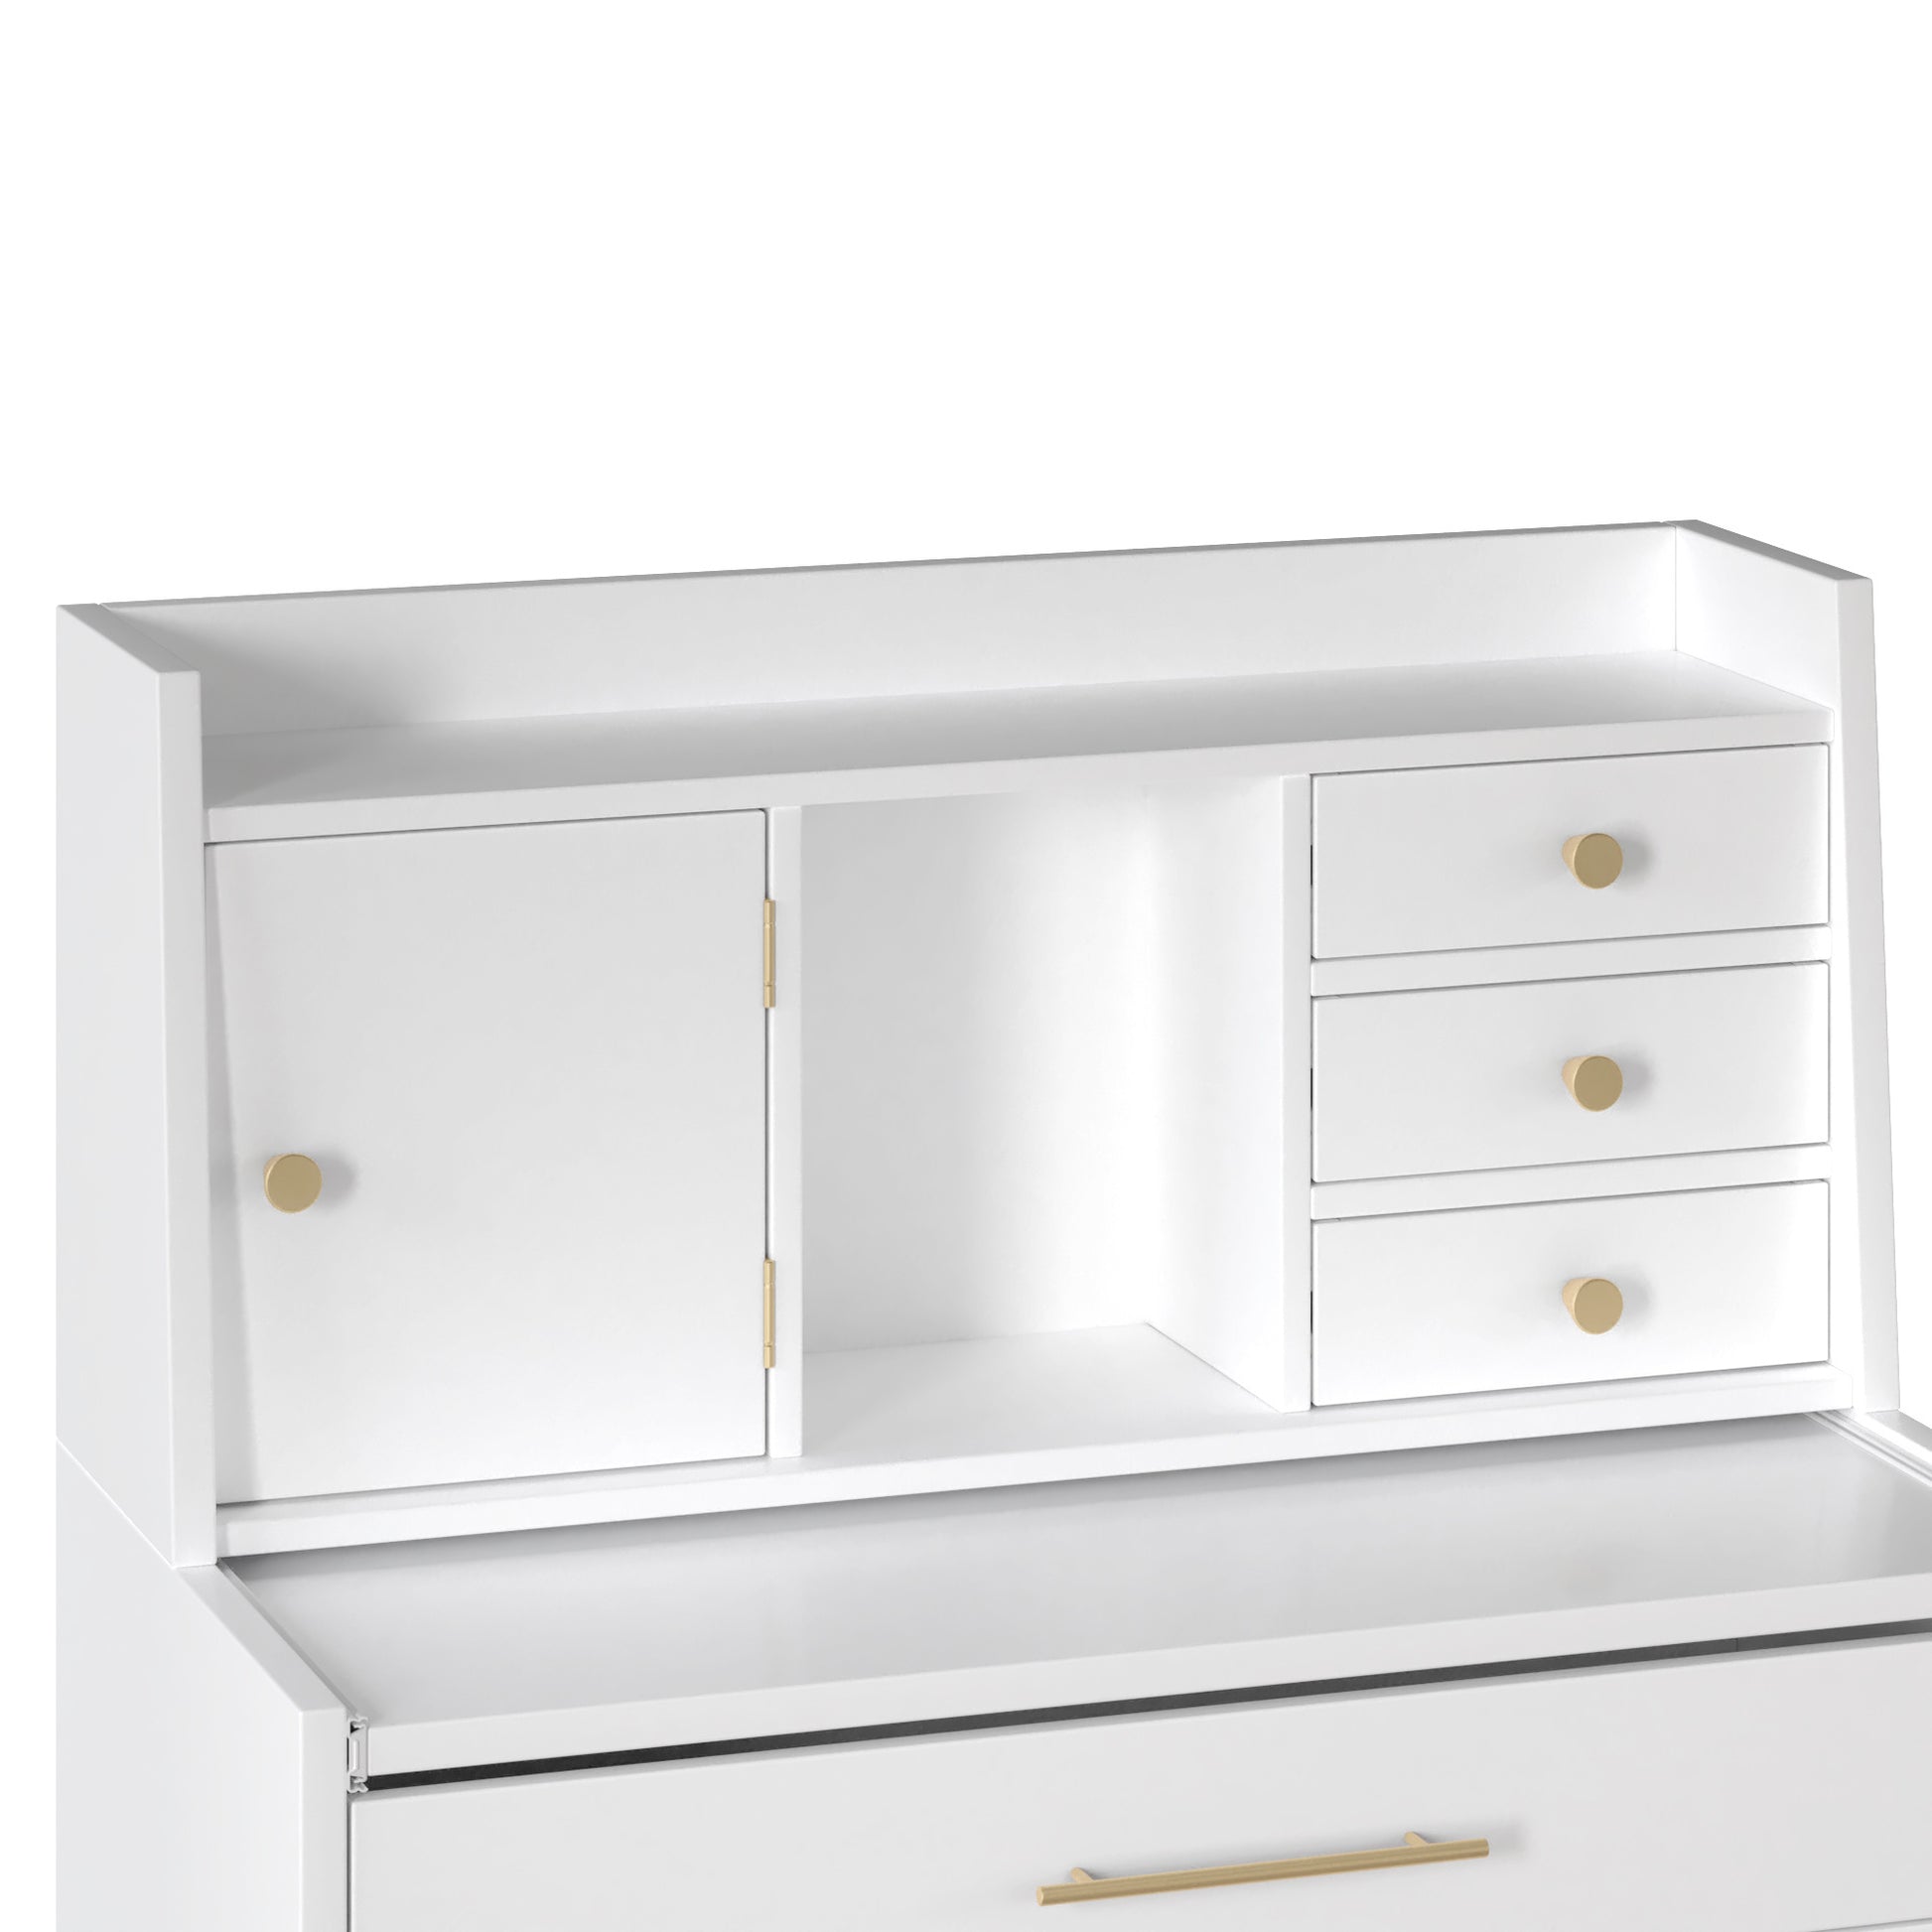 Vanity Makeup Table with Mirror and Retractable Table, Storage Dresser for Bedroom with 7 Drawers and Hidden Storage,White - lolaluxeshop